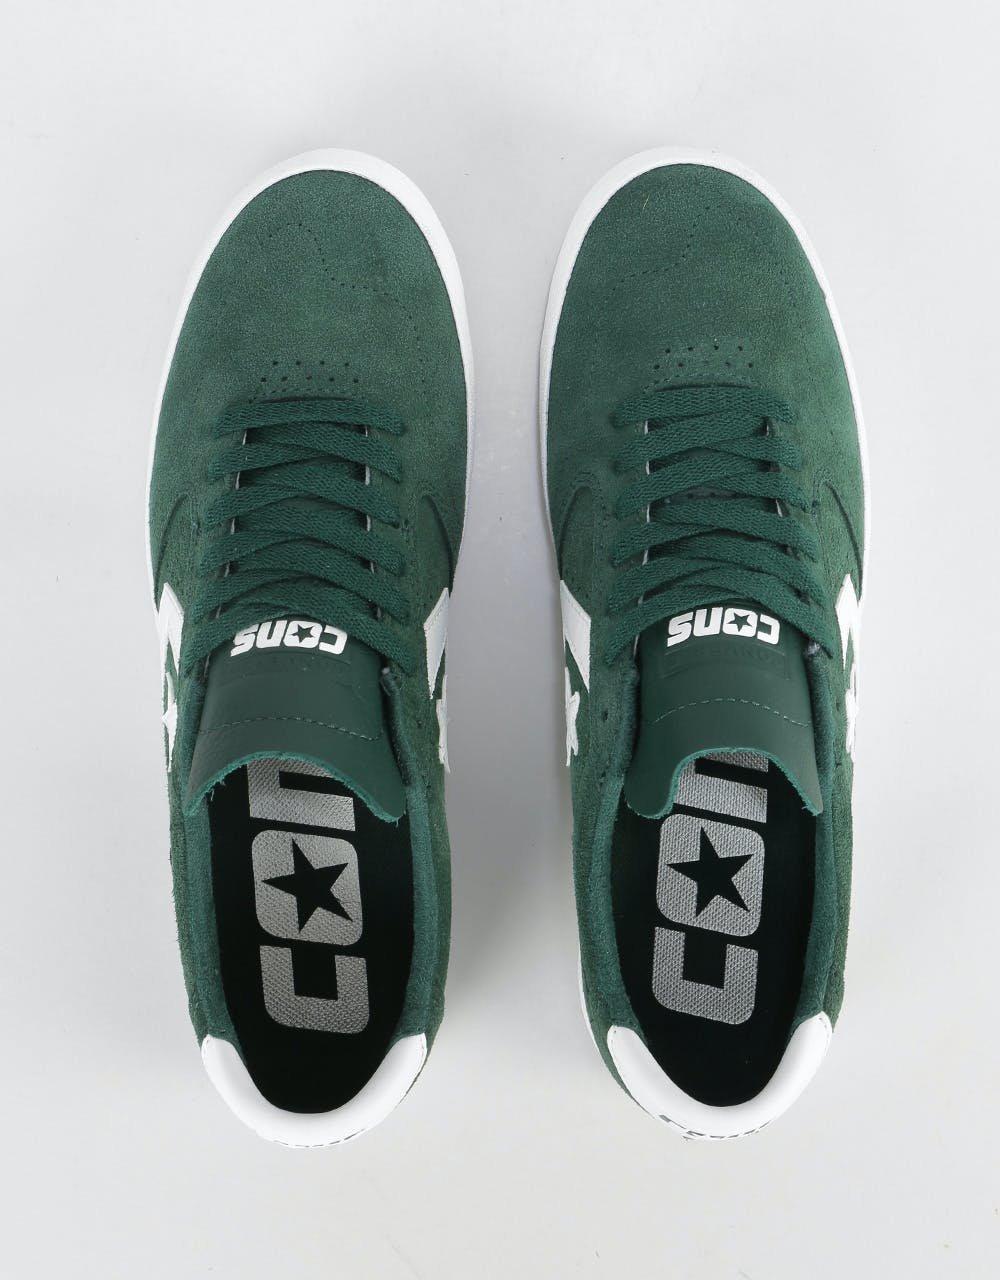 Converse Checkpoint Pro Ox Skate Shoes - Deep Emerald/White/White